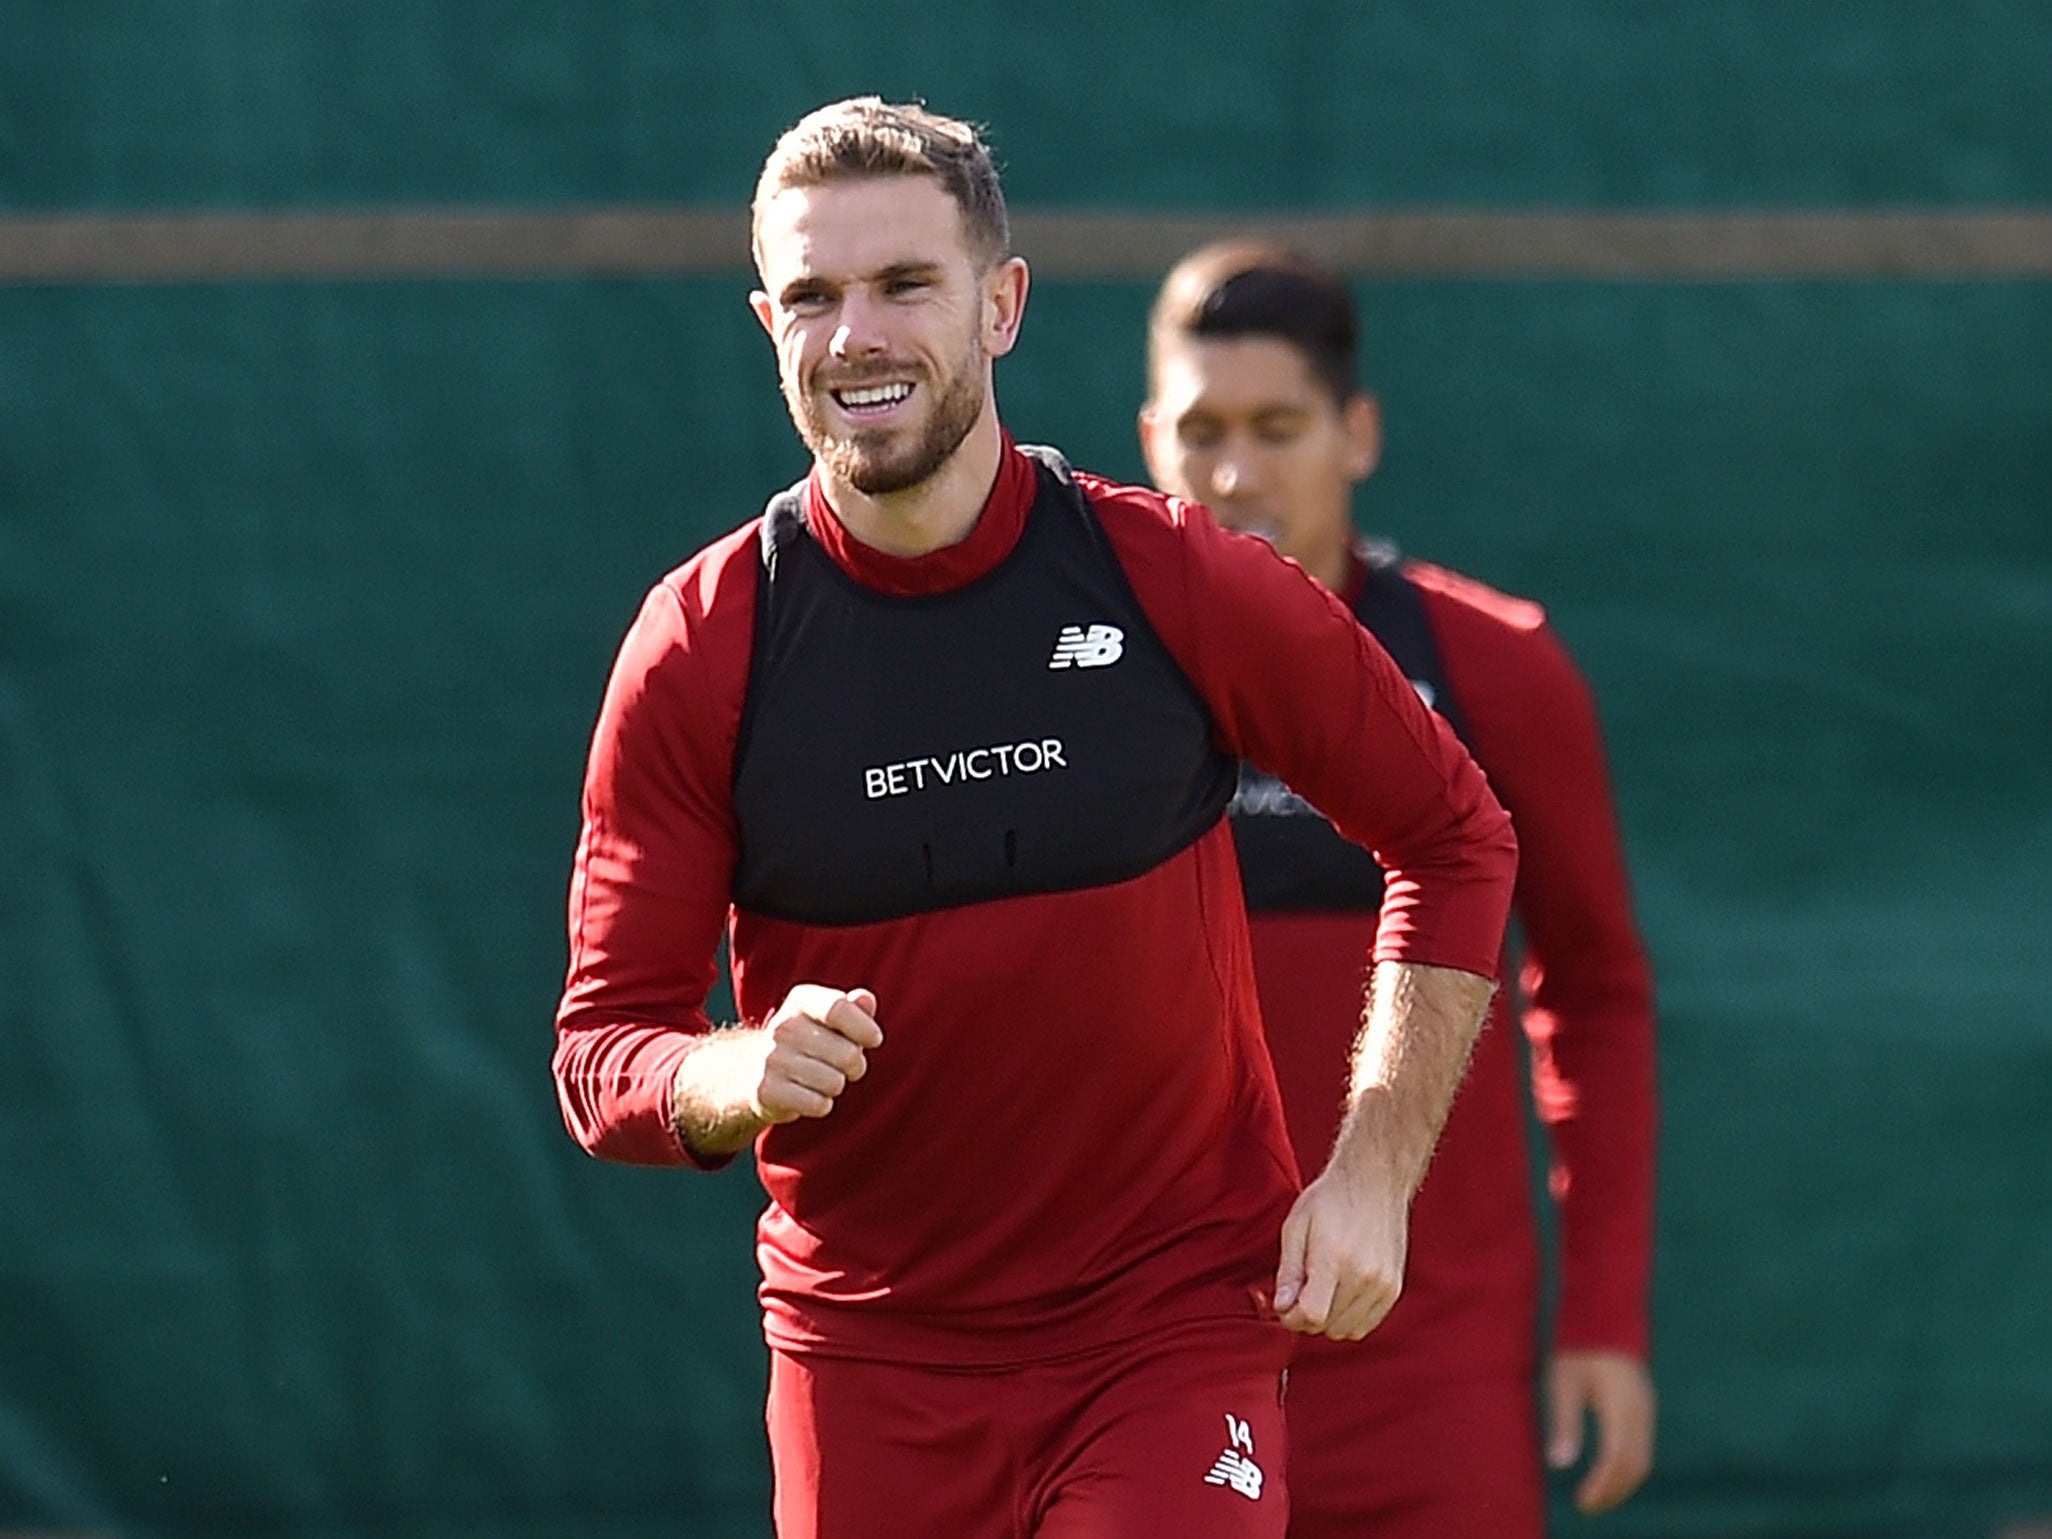 Jordan Henderson played the full 90 minutes for England against Lithuania